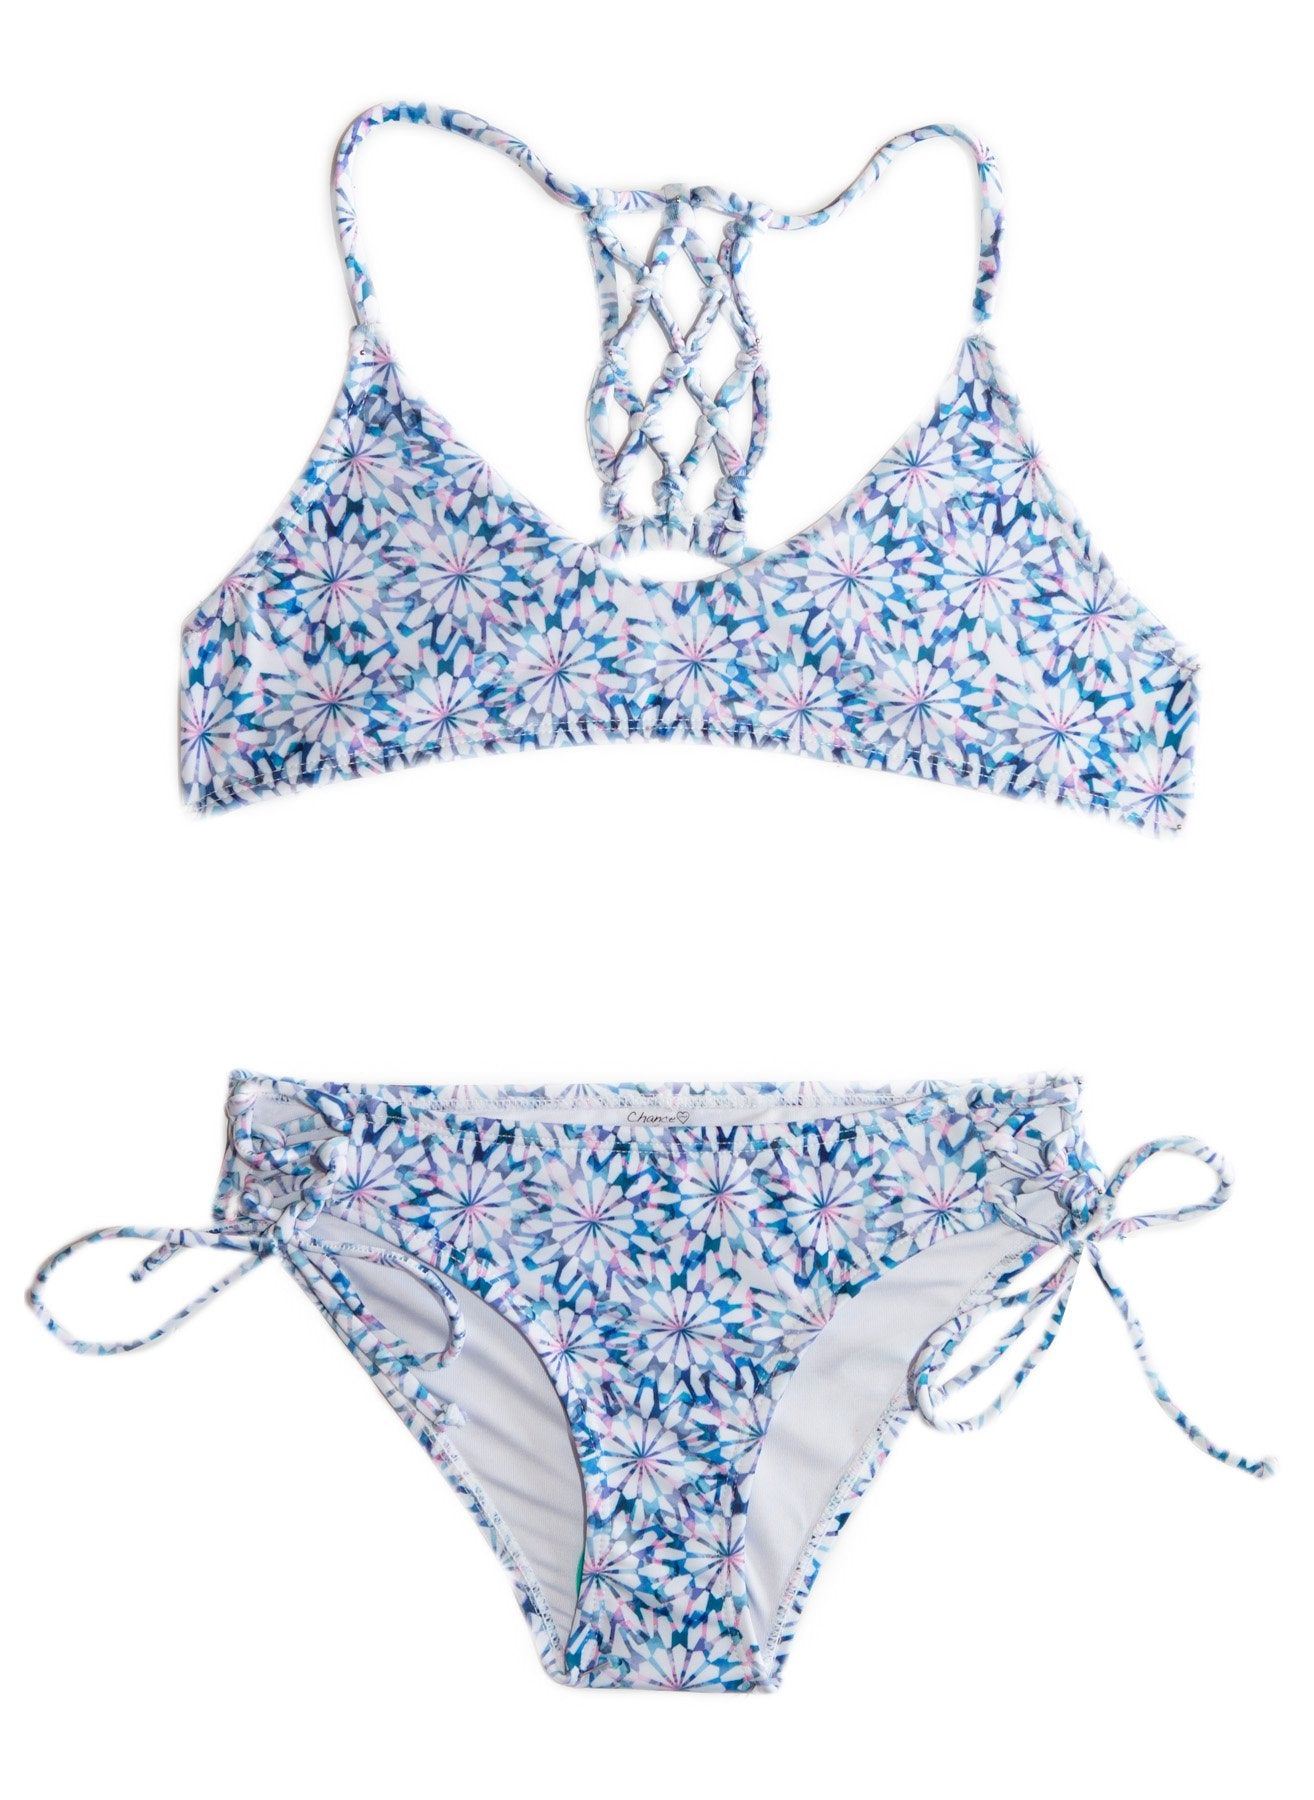 Daisy Blue TWO PIECE Blue and White FLORAL Girls Bikini SET- YOUTH SIZING Chance Loves Swimwear